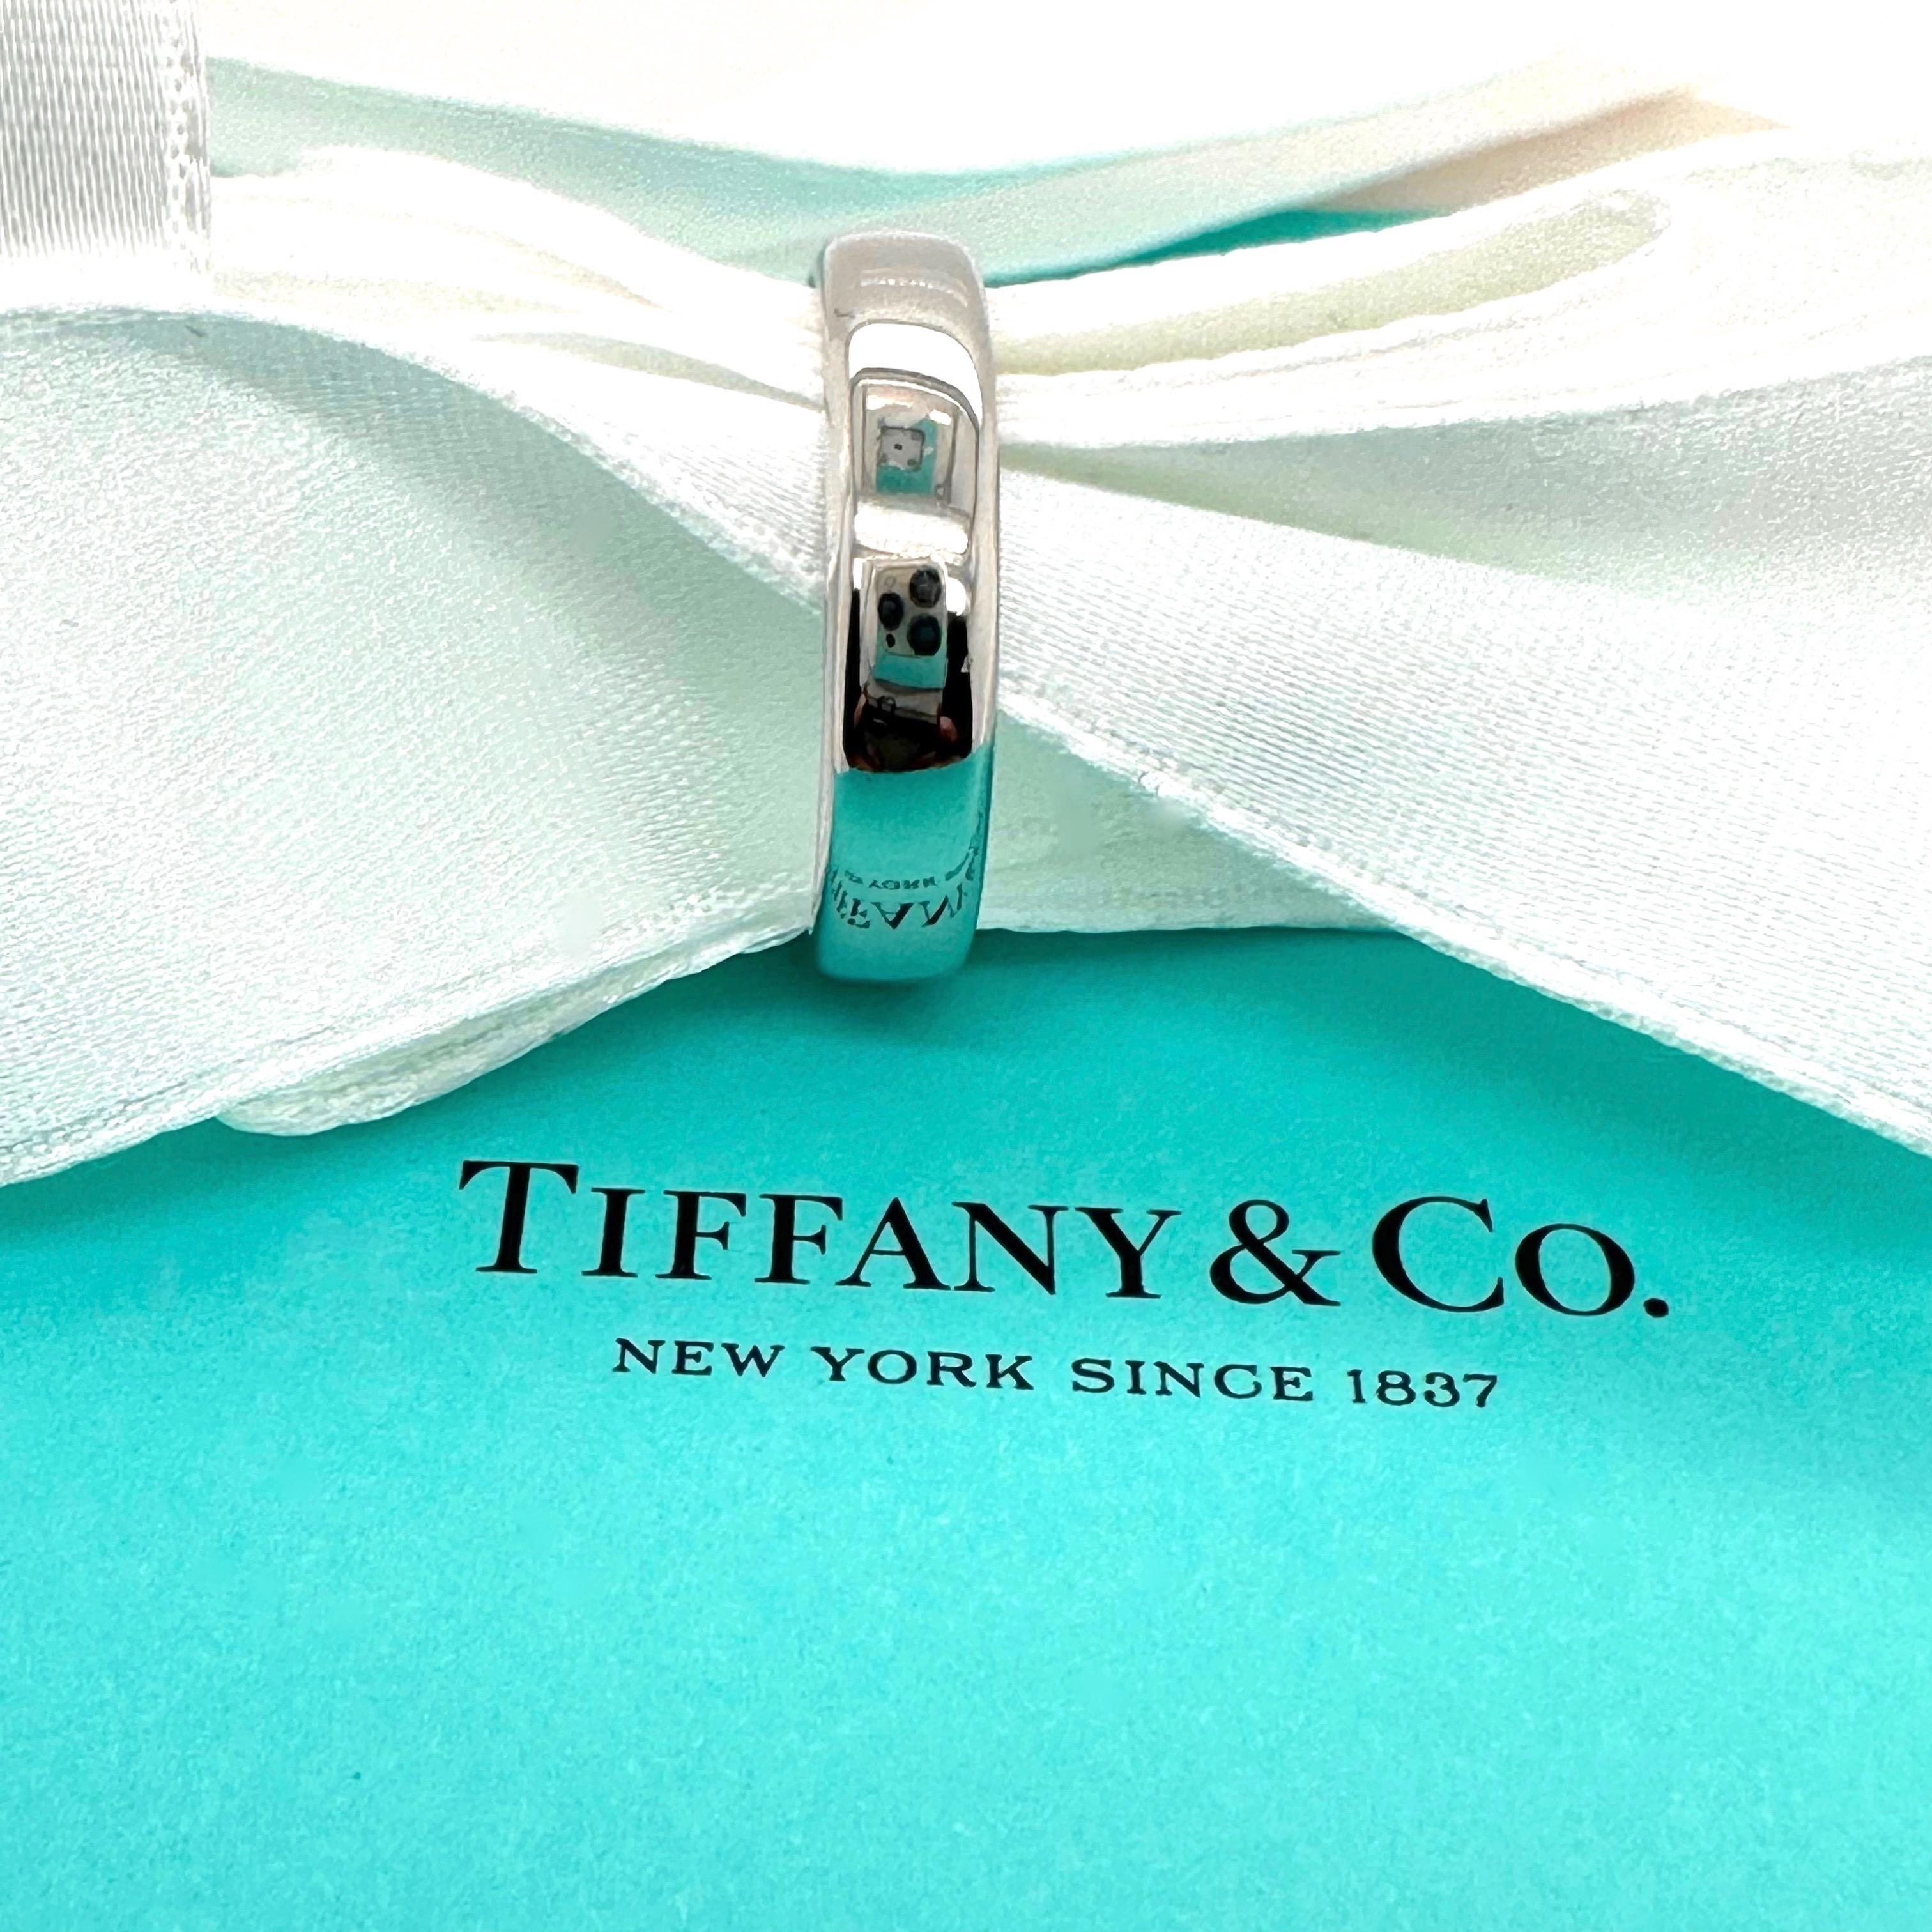 Tiffany & Co. Forever Wedding Band Ring
Style:  Band
Ref. number:   6002585
Metal:  Platinum 950
Size:  8 sizable
Measurements:  4.5 MM
Hallmark:  ©1999 TIFFANY&CO. PT 950
Includes:  T&C Jewelry Envelope
Retail:  $2,200
Sku#11500TDE-OFC